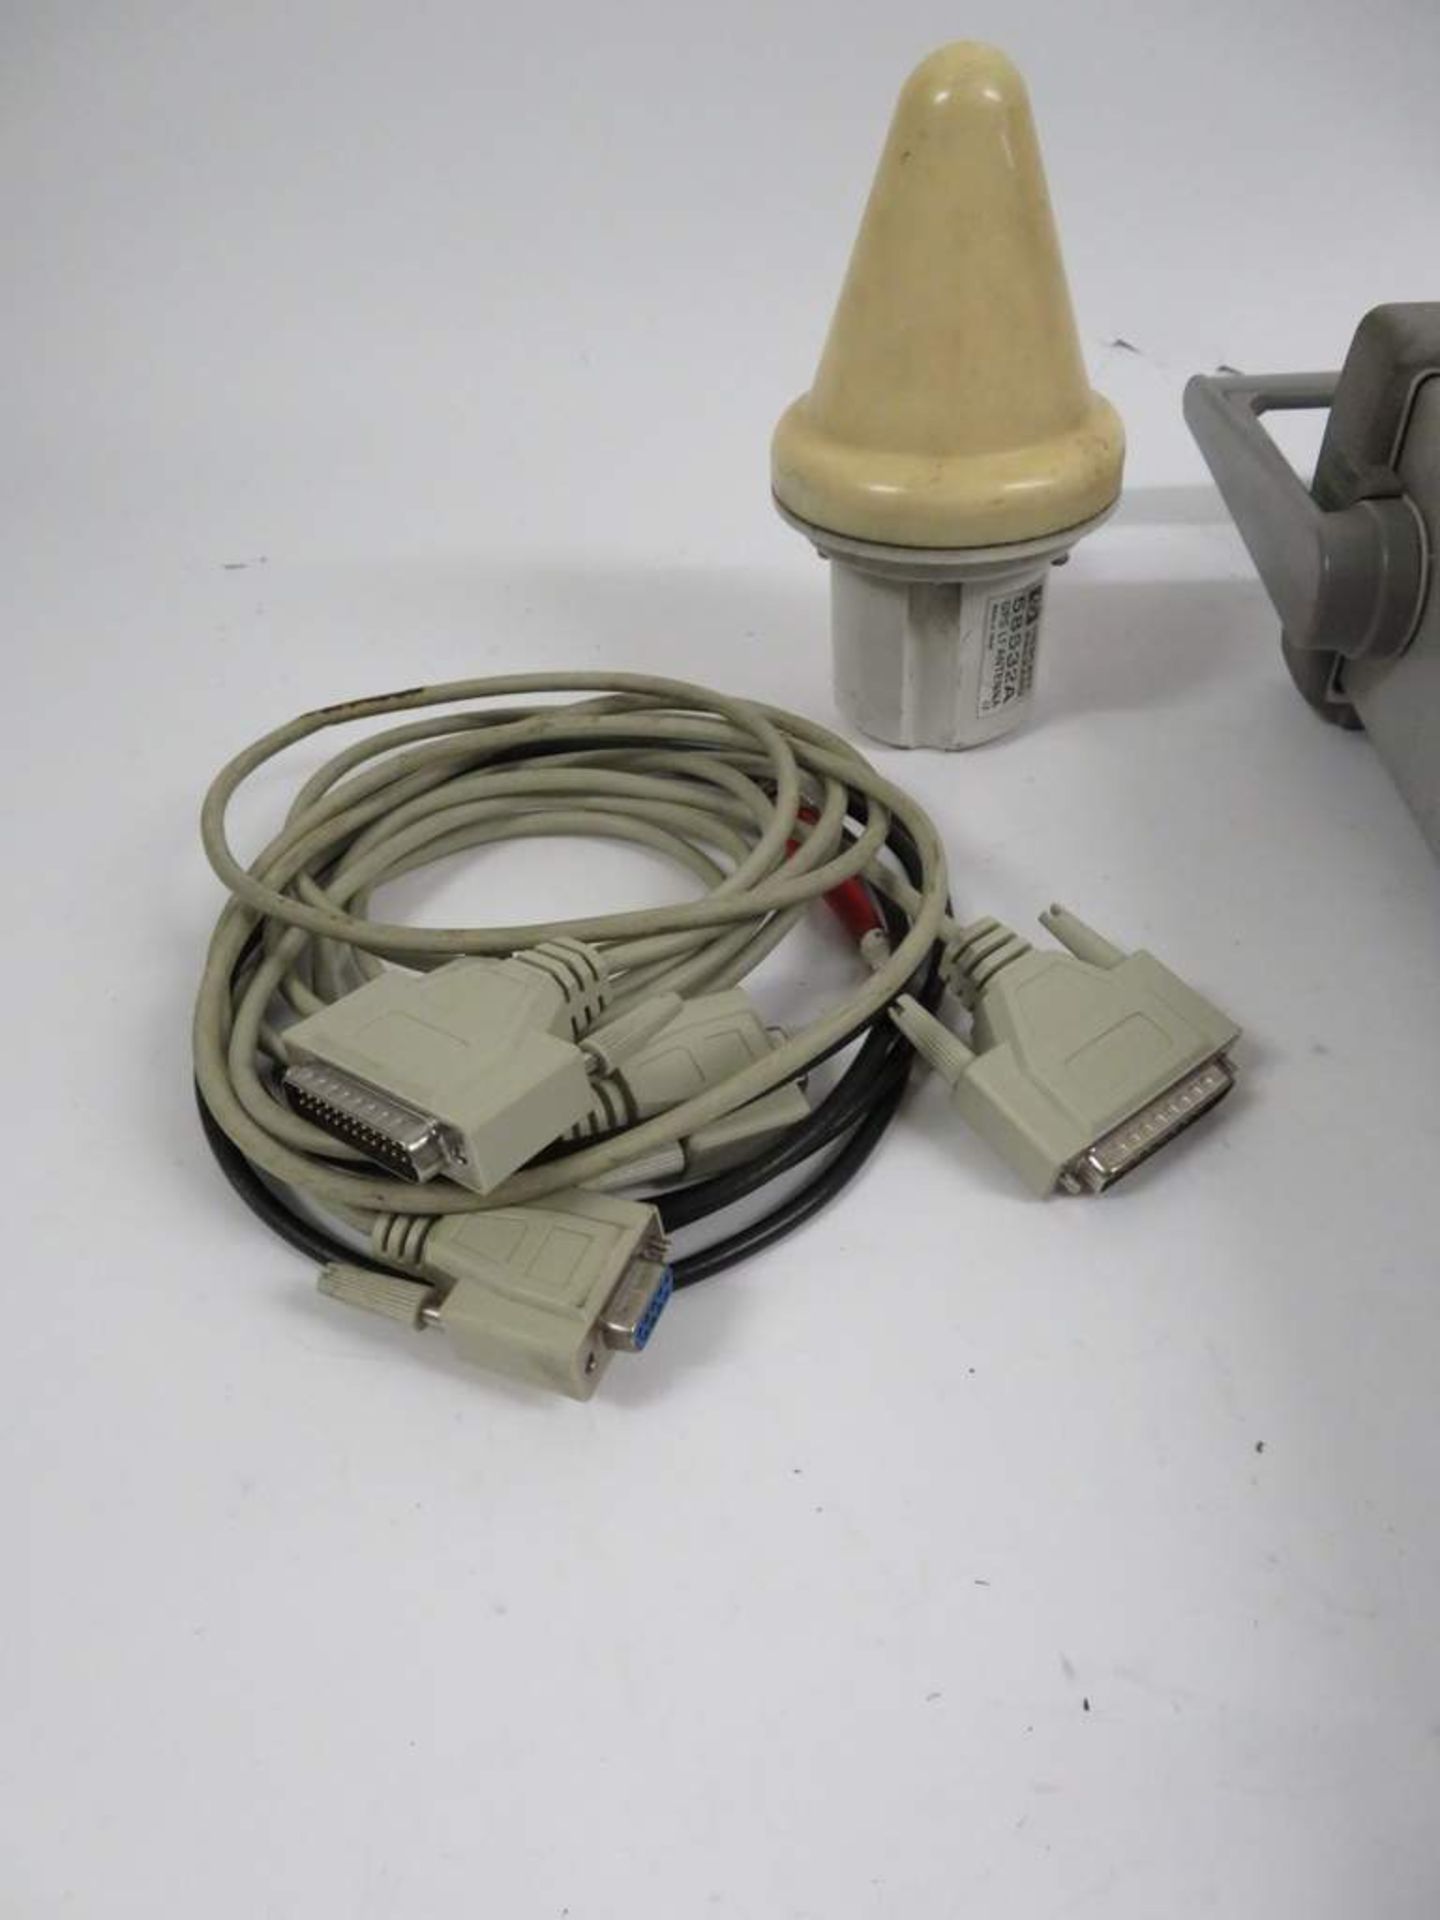 Hewlett Packard 58532A GPS L1 Antenna & HP 58503B GPS time & frequency reference receiver - Bild 4 aus 5